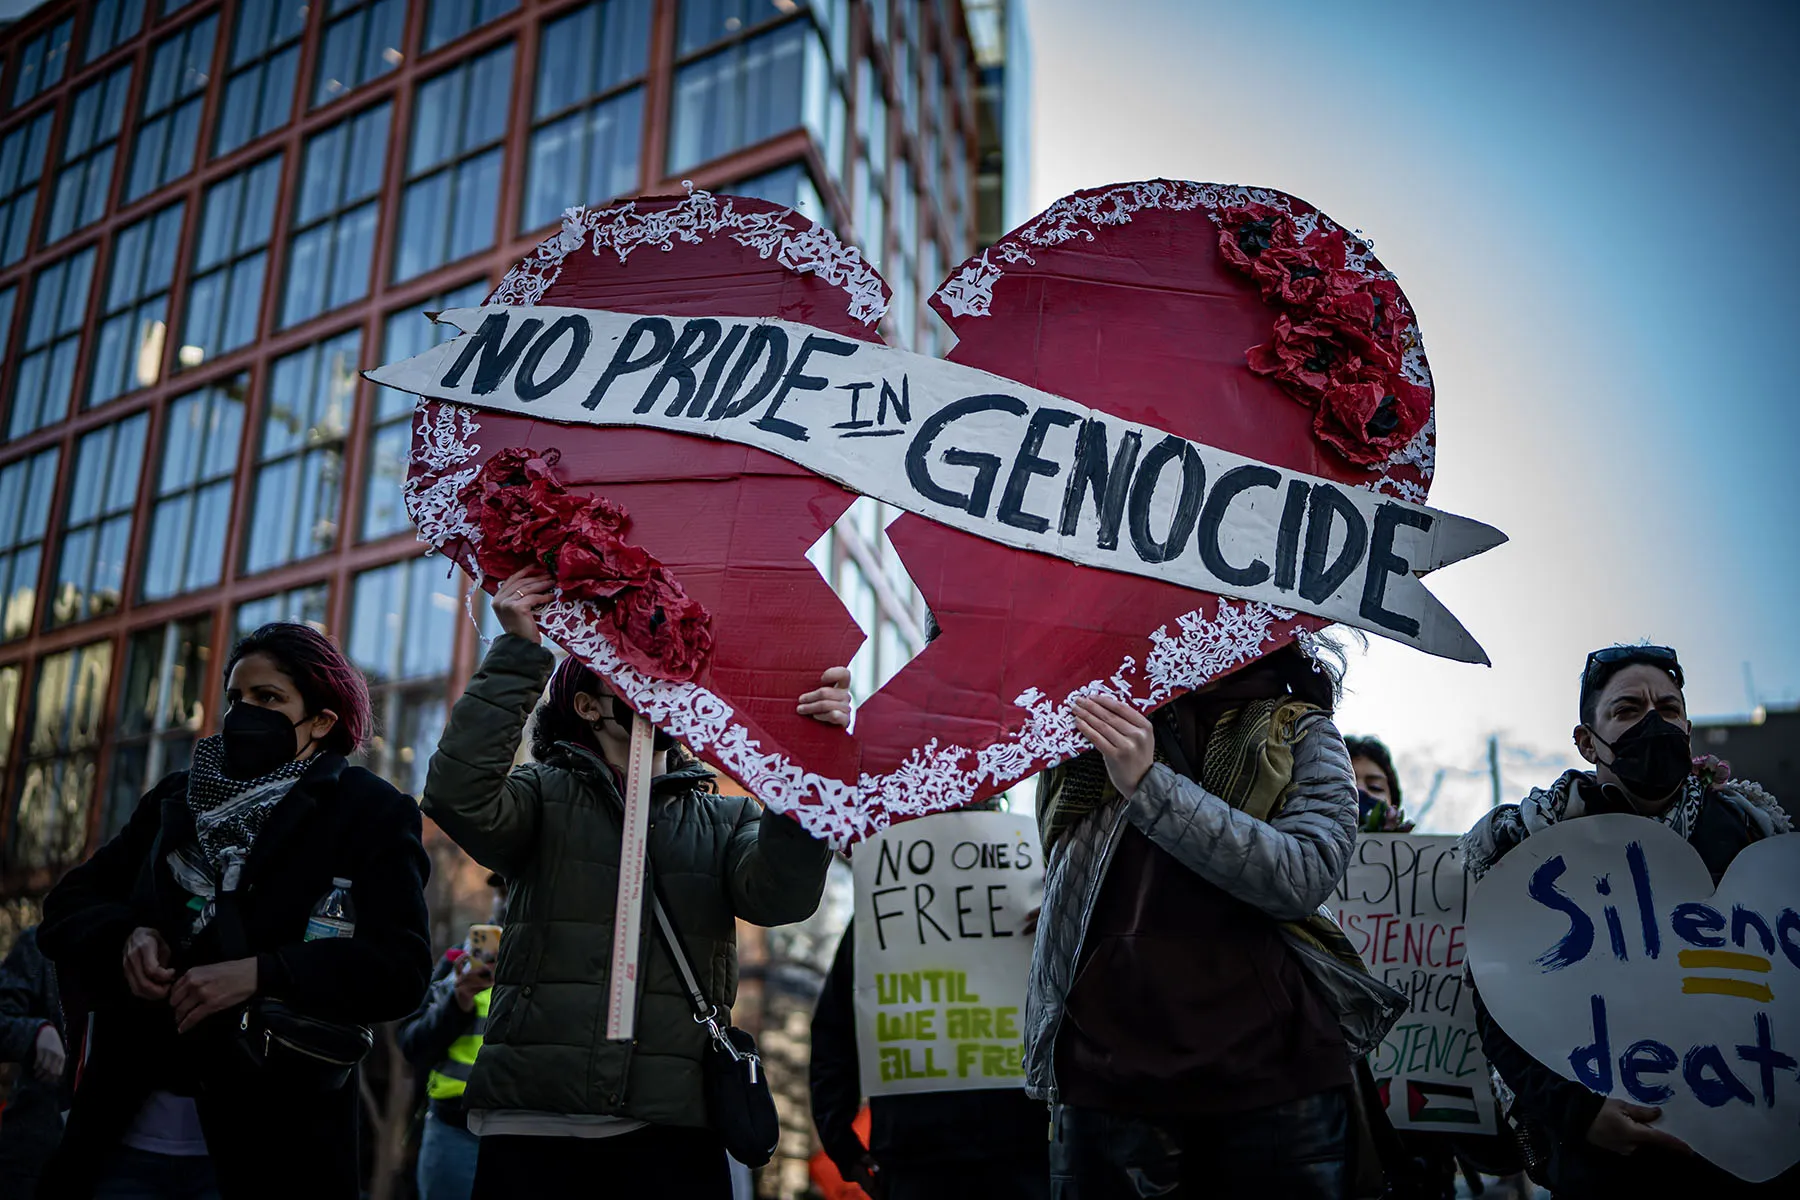 Two people hold a broken heart that reads "No Pride in Genocide" during a rally near the Human Rights Campaign headquarters.